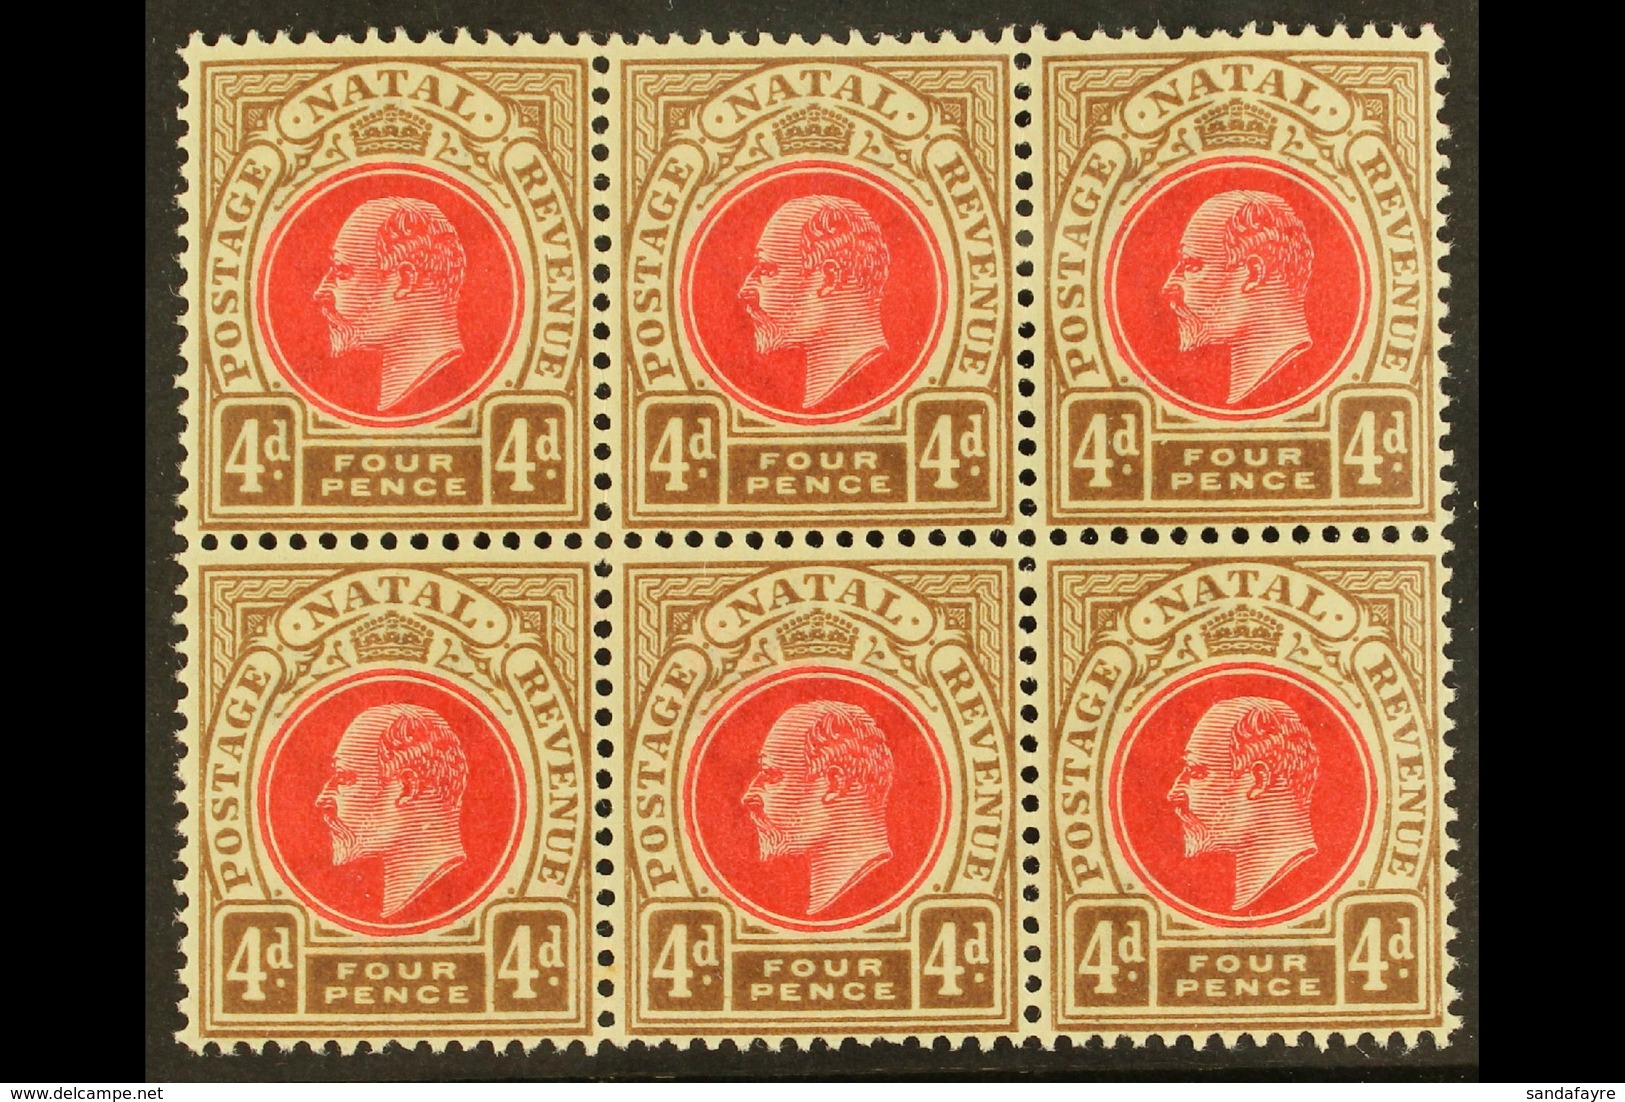 NATAL 1902-3 4d Carmine & Cinnamon, Wmk Crown CA , BLOCK OF SIX, SG 133, Very Slightly Toned Gum, Otherwise Never Hinged - Sin Clasificación